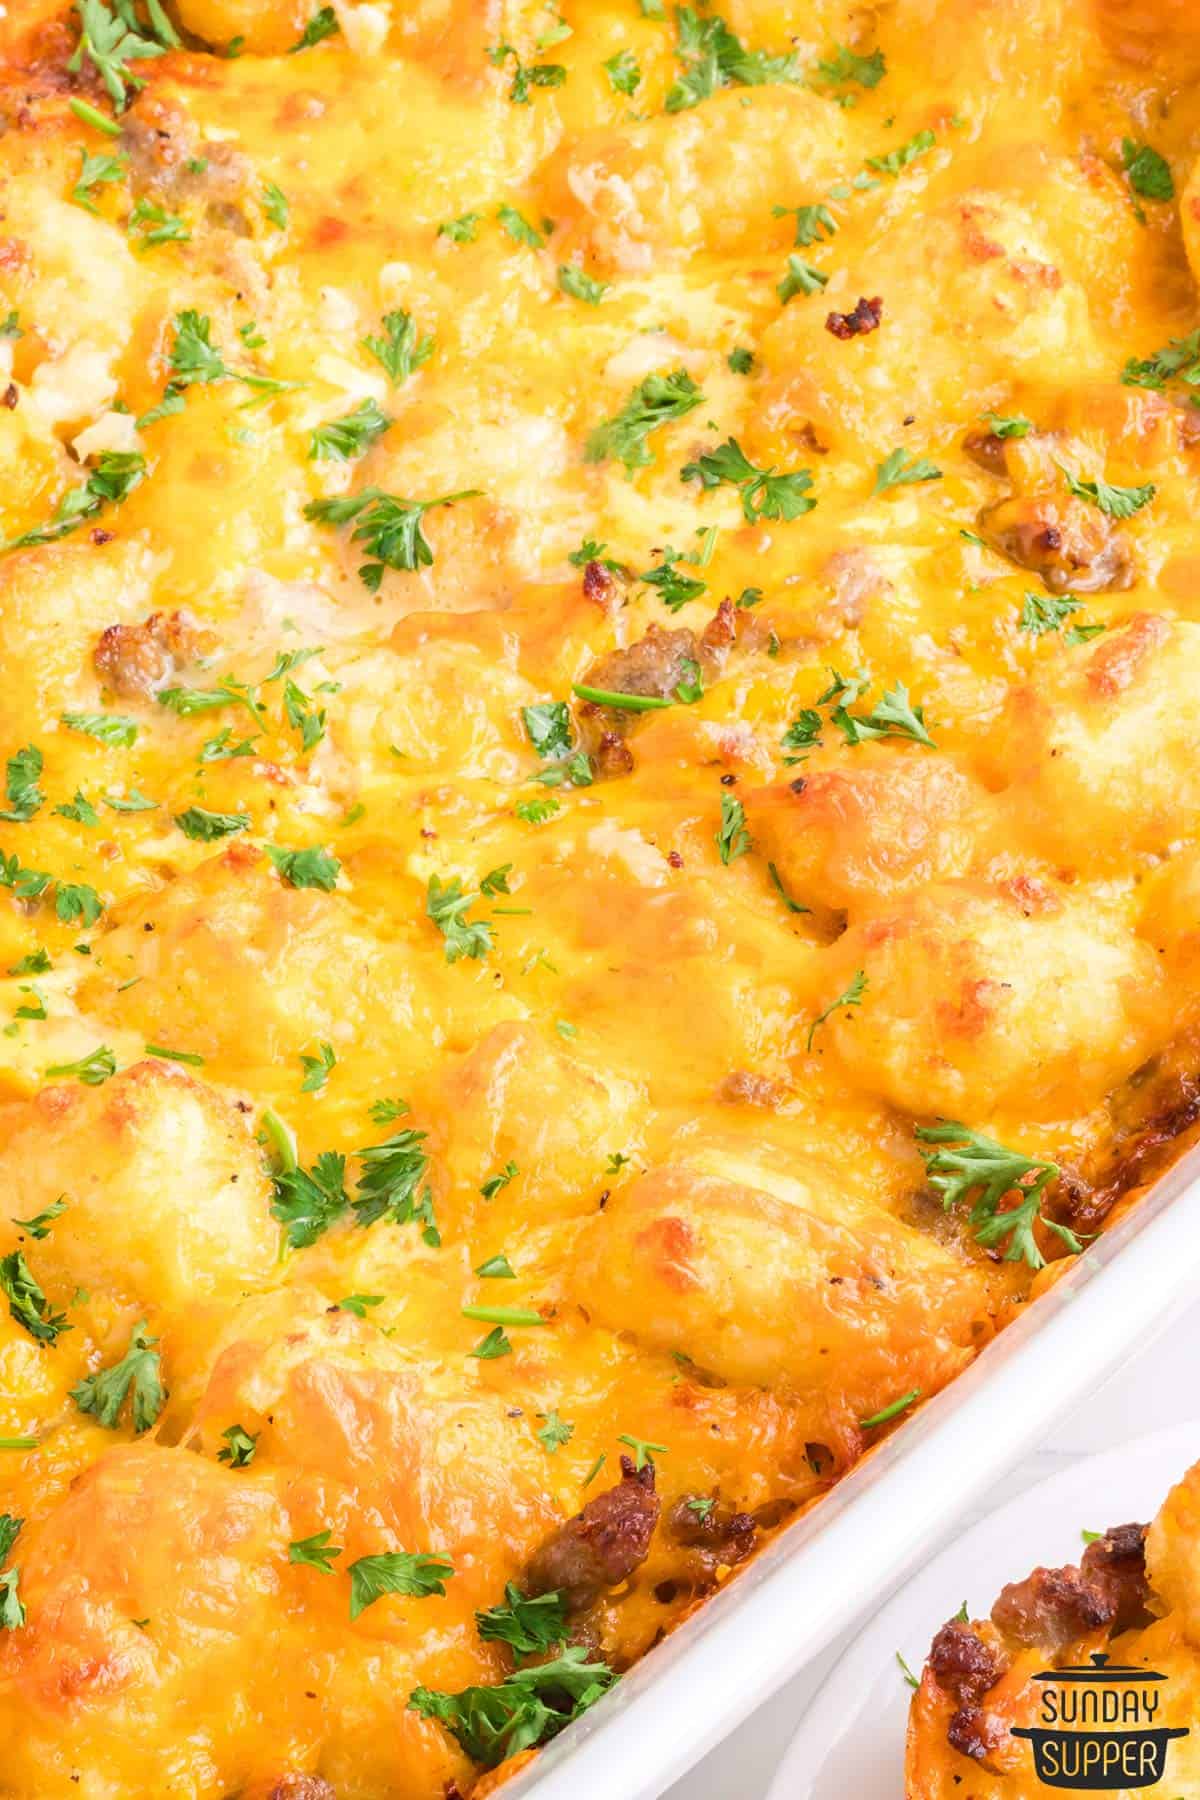 baked breakfast casserole with tater tots